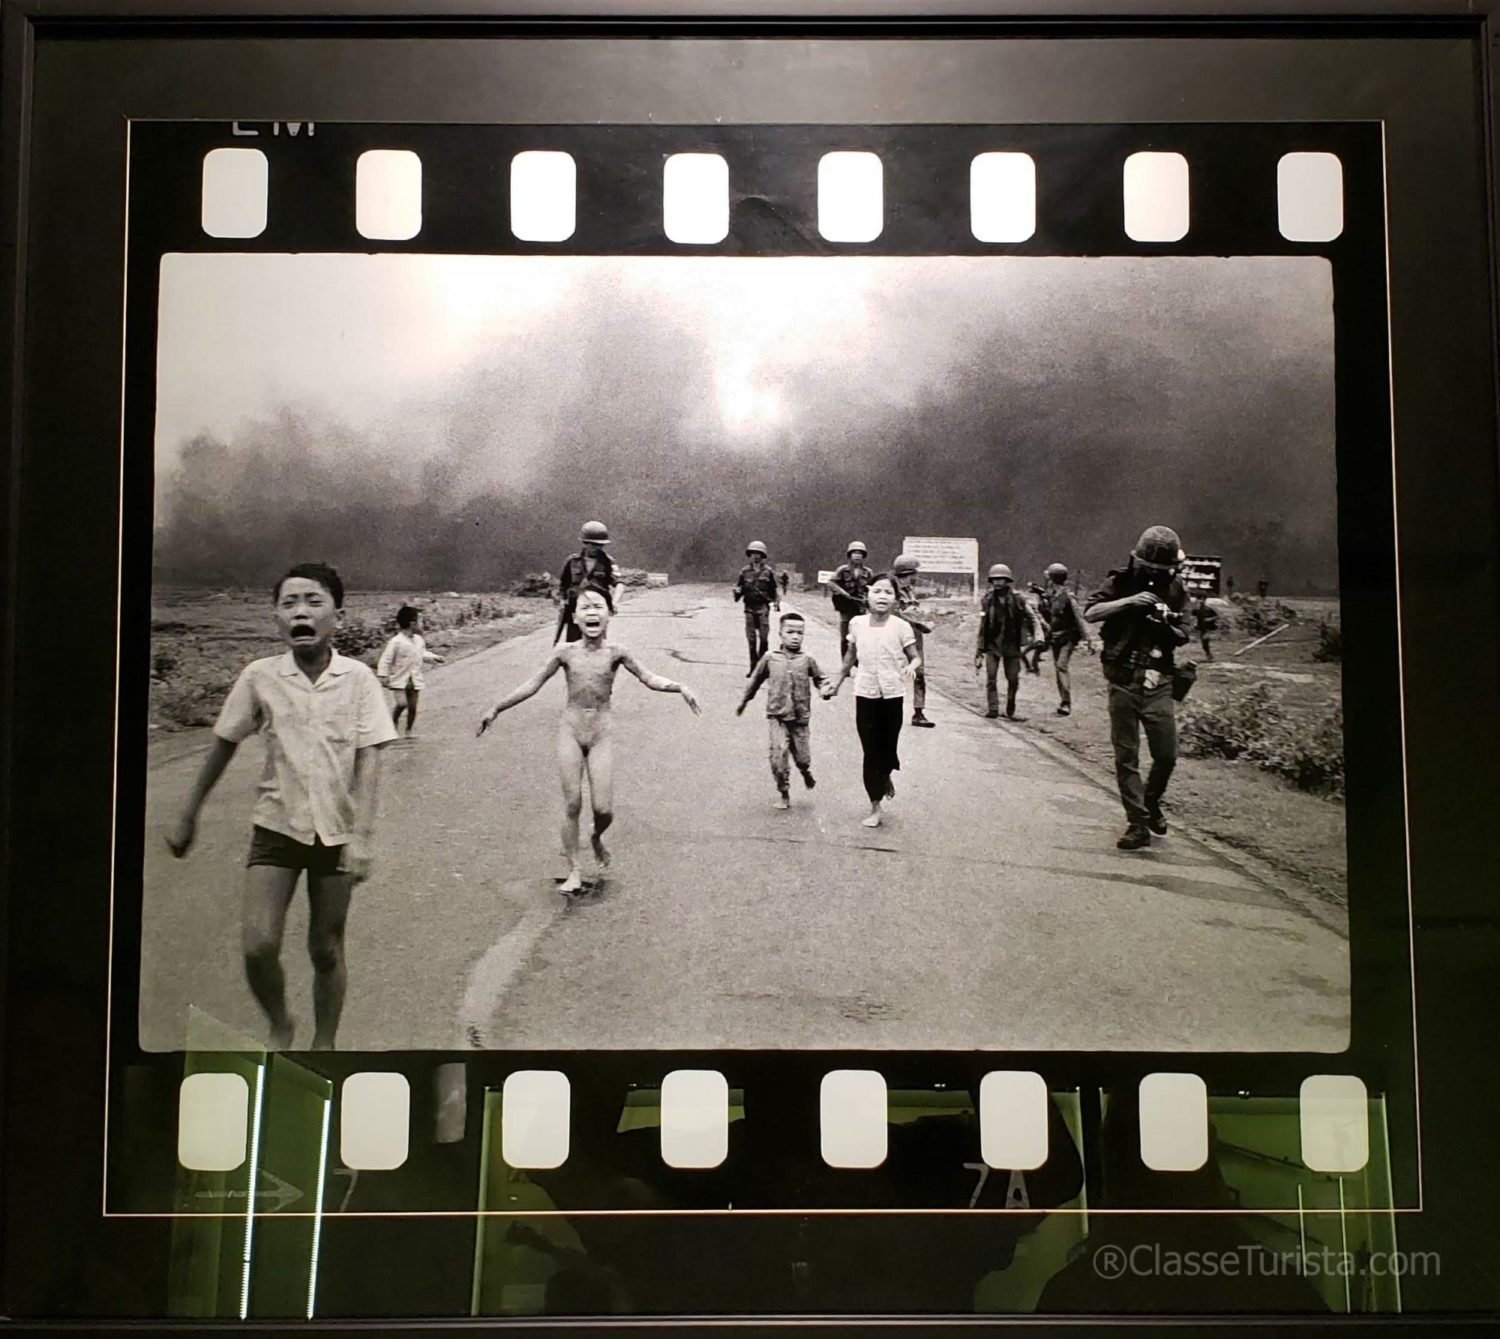 Kim Phuc Phan Thi - Fire Road (picture of Nick Ut), War Remnants Museum, Ho Chi Minh City